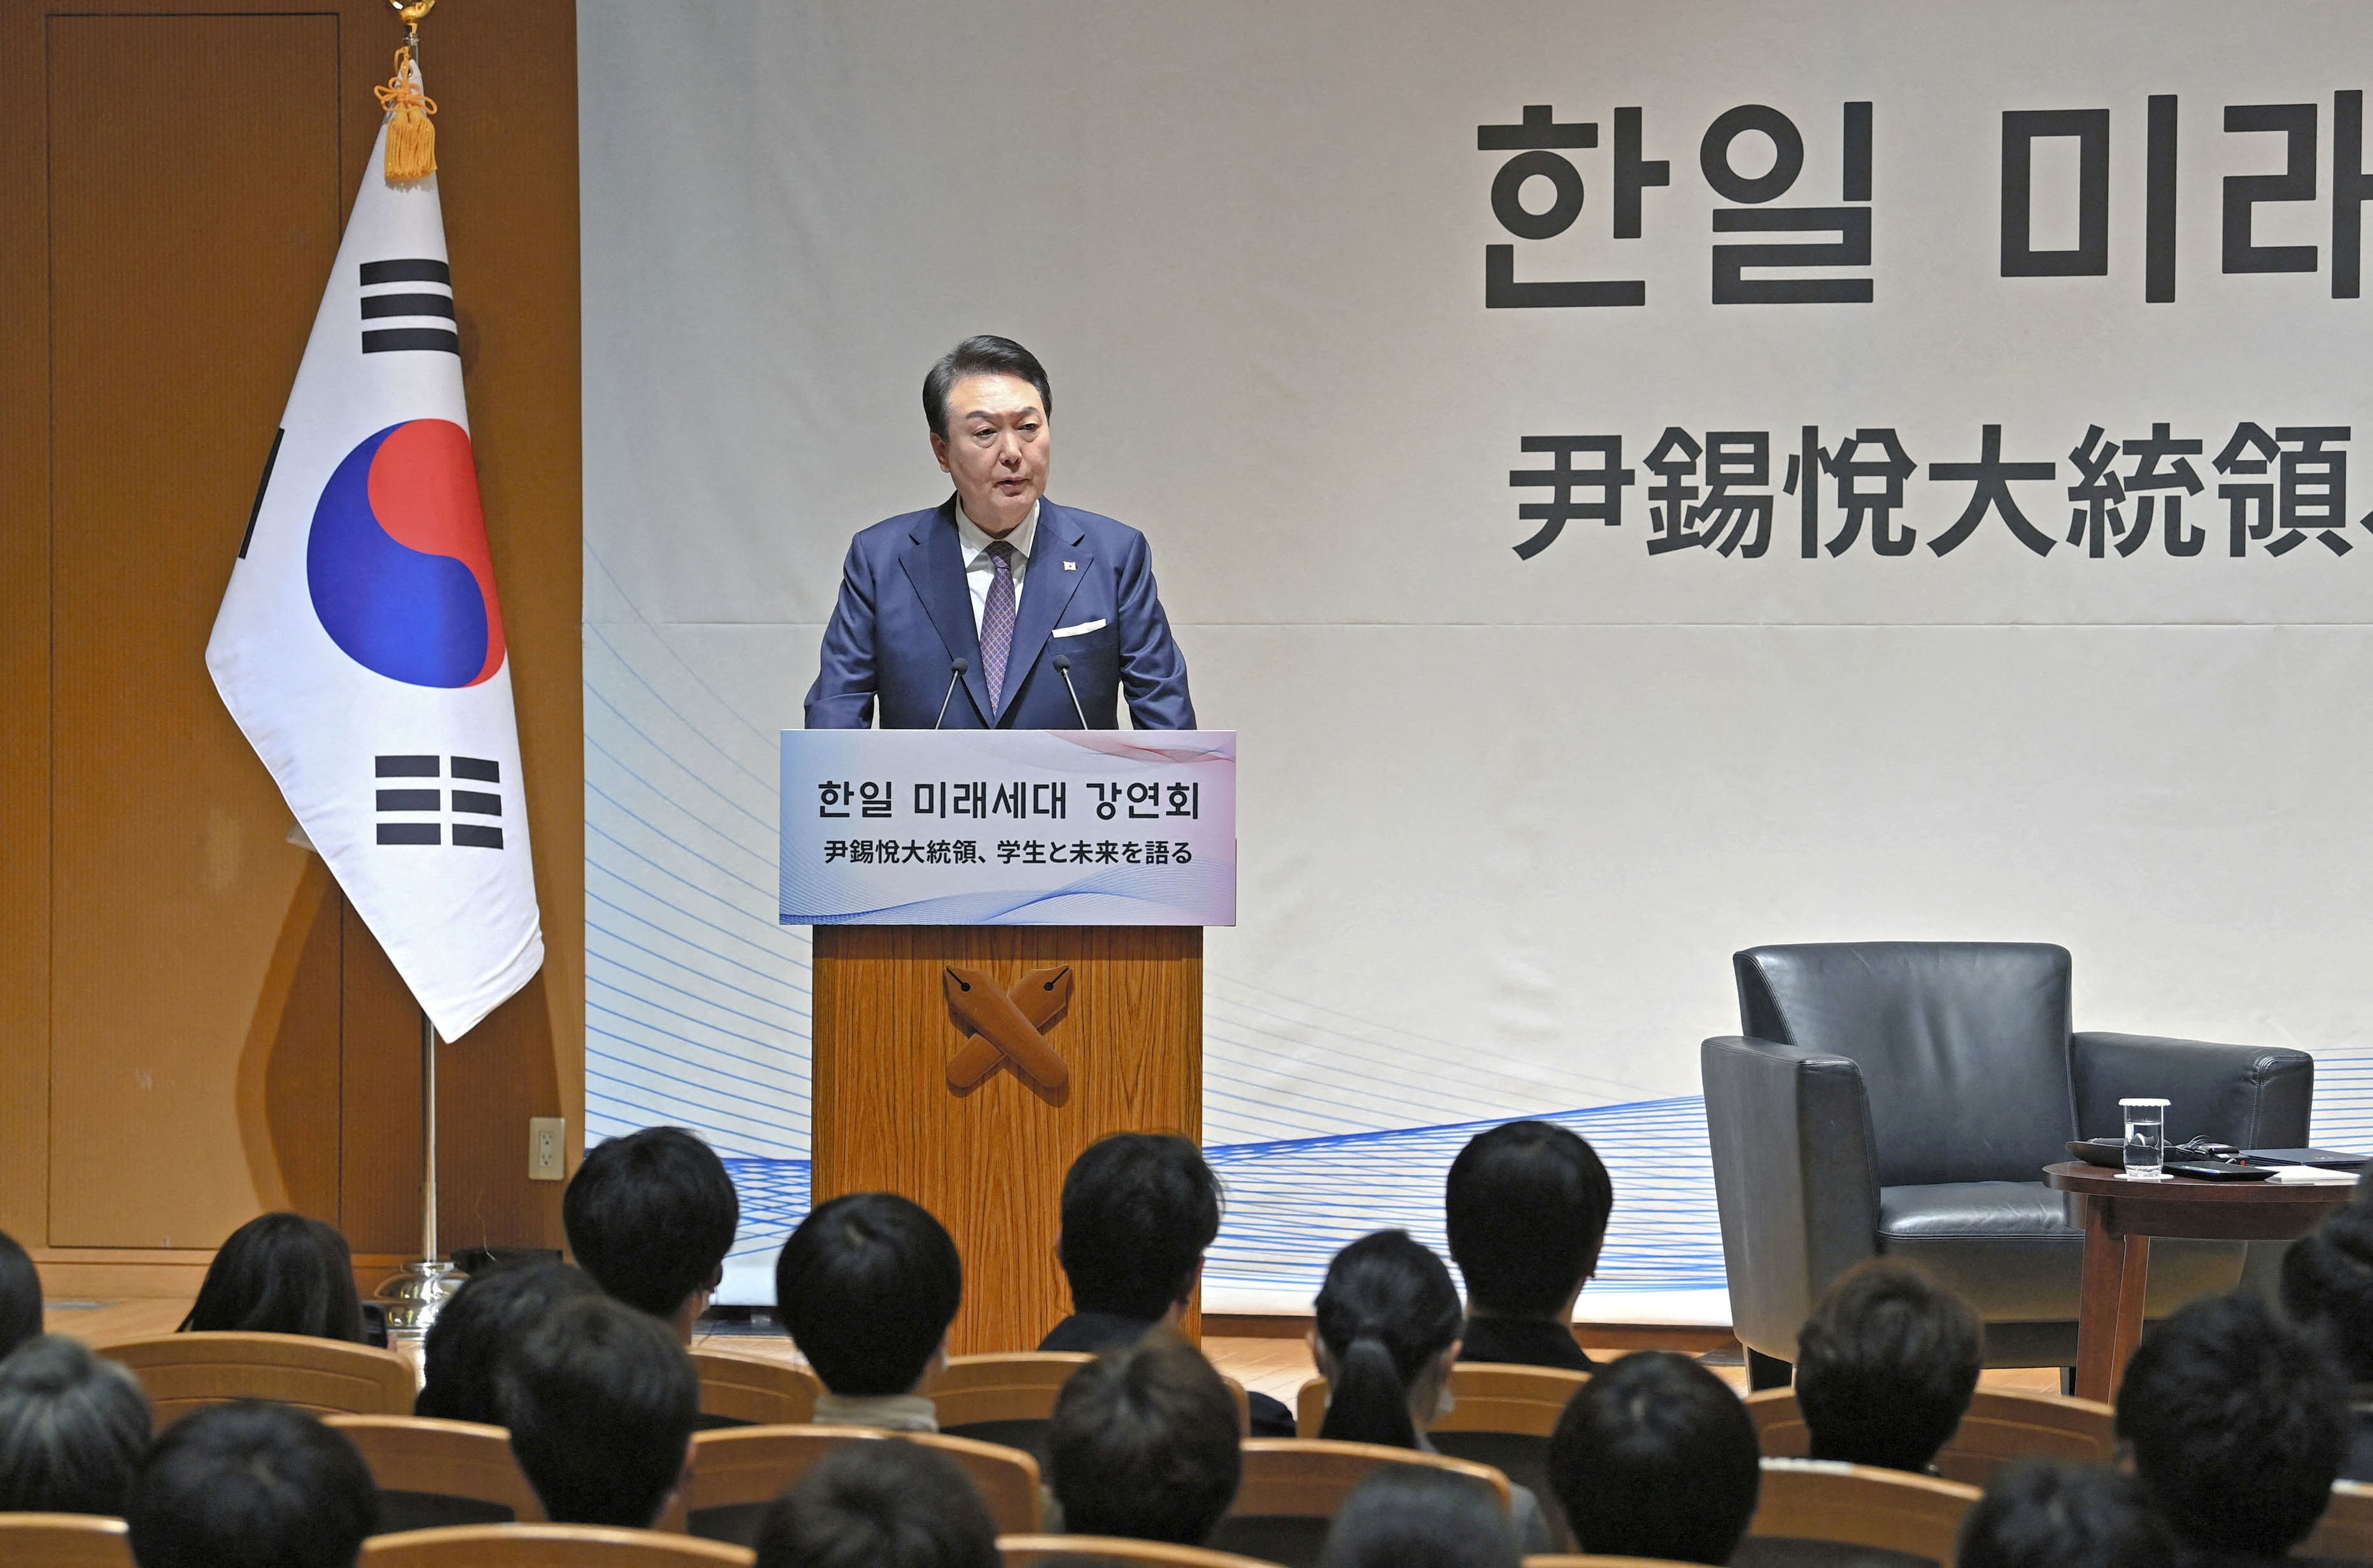 South Korea's President Yoon Suk Yeol delivers a speech to students at Keio University in Tokyo